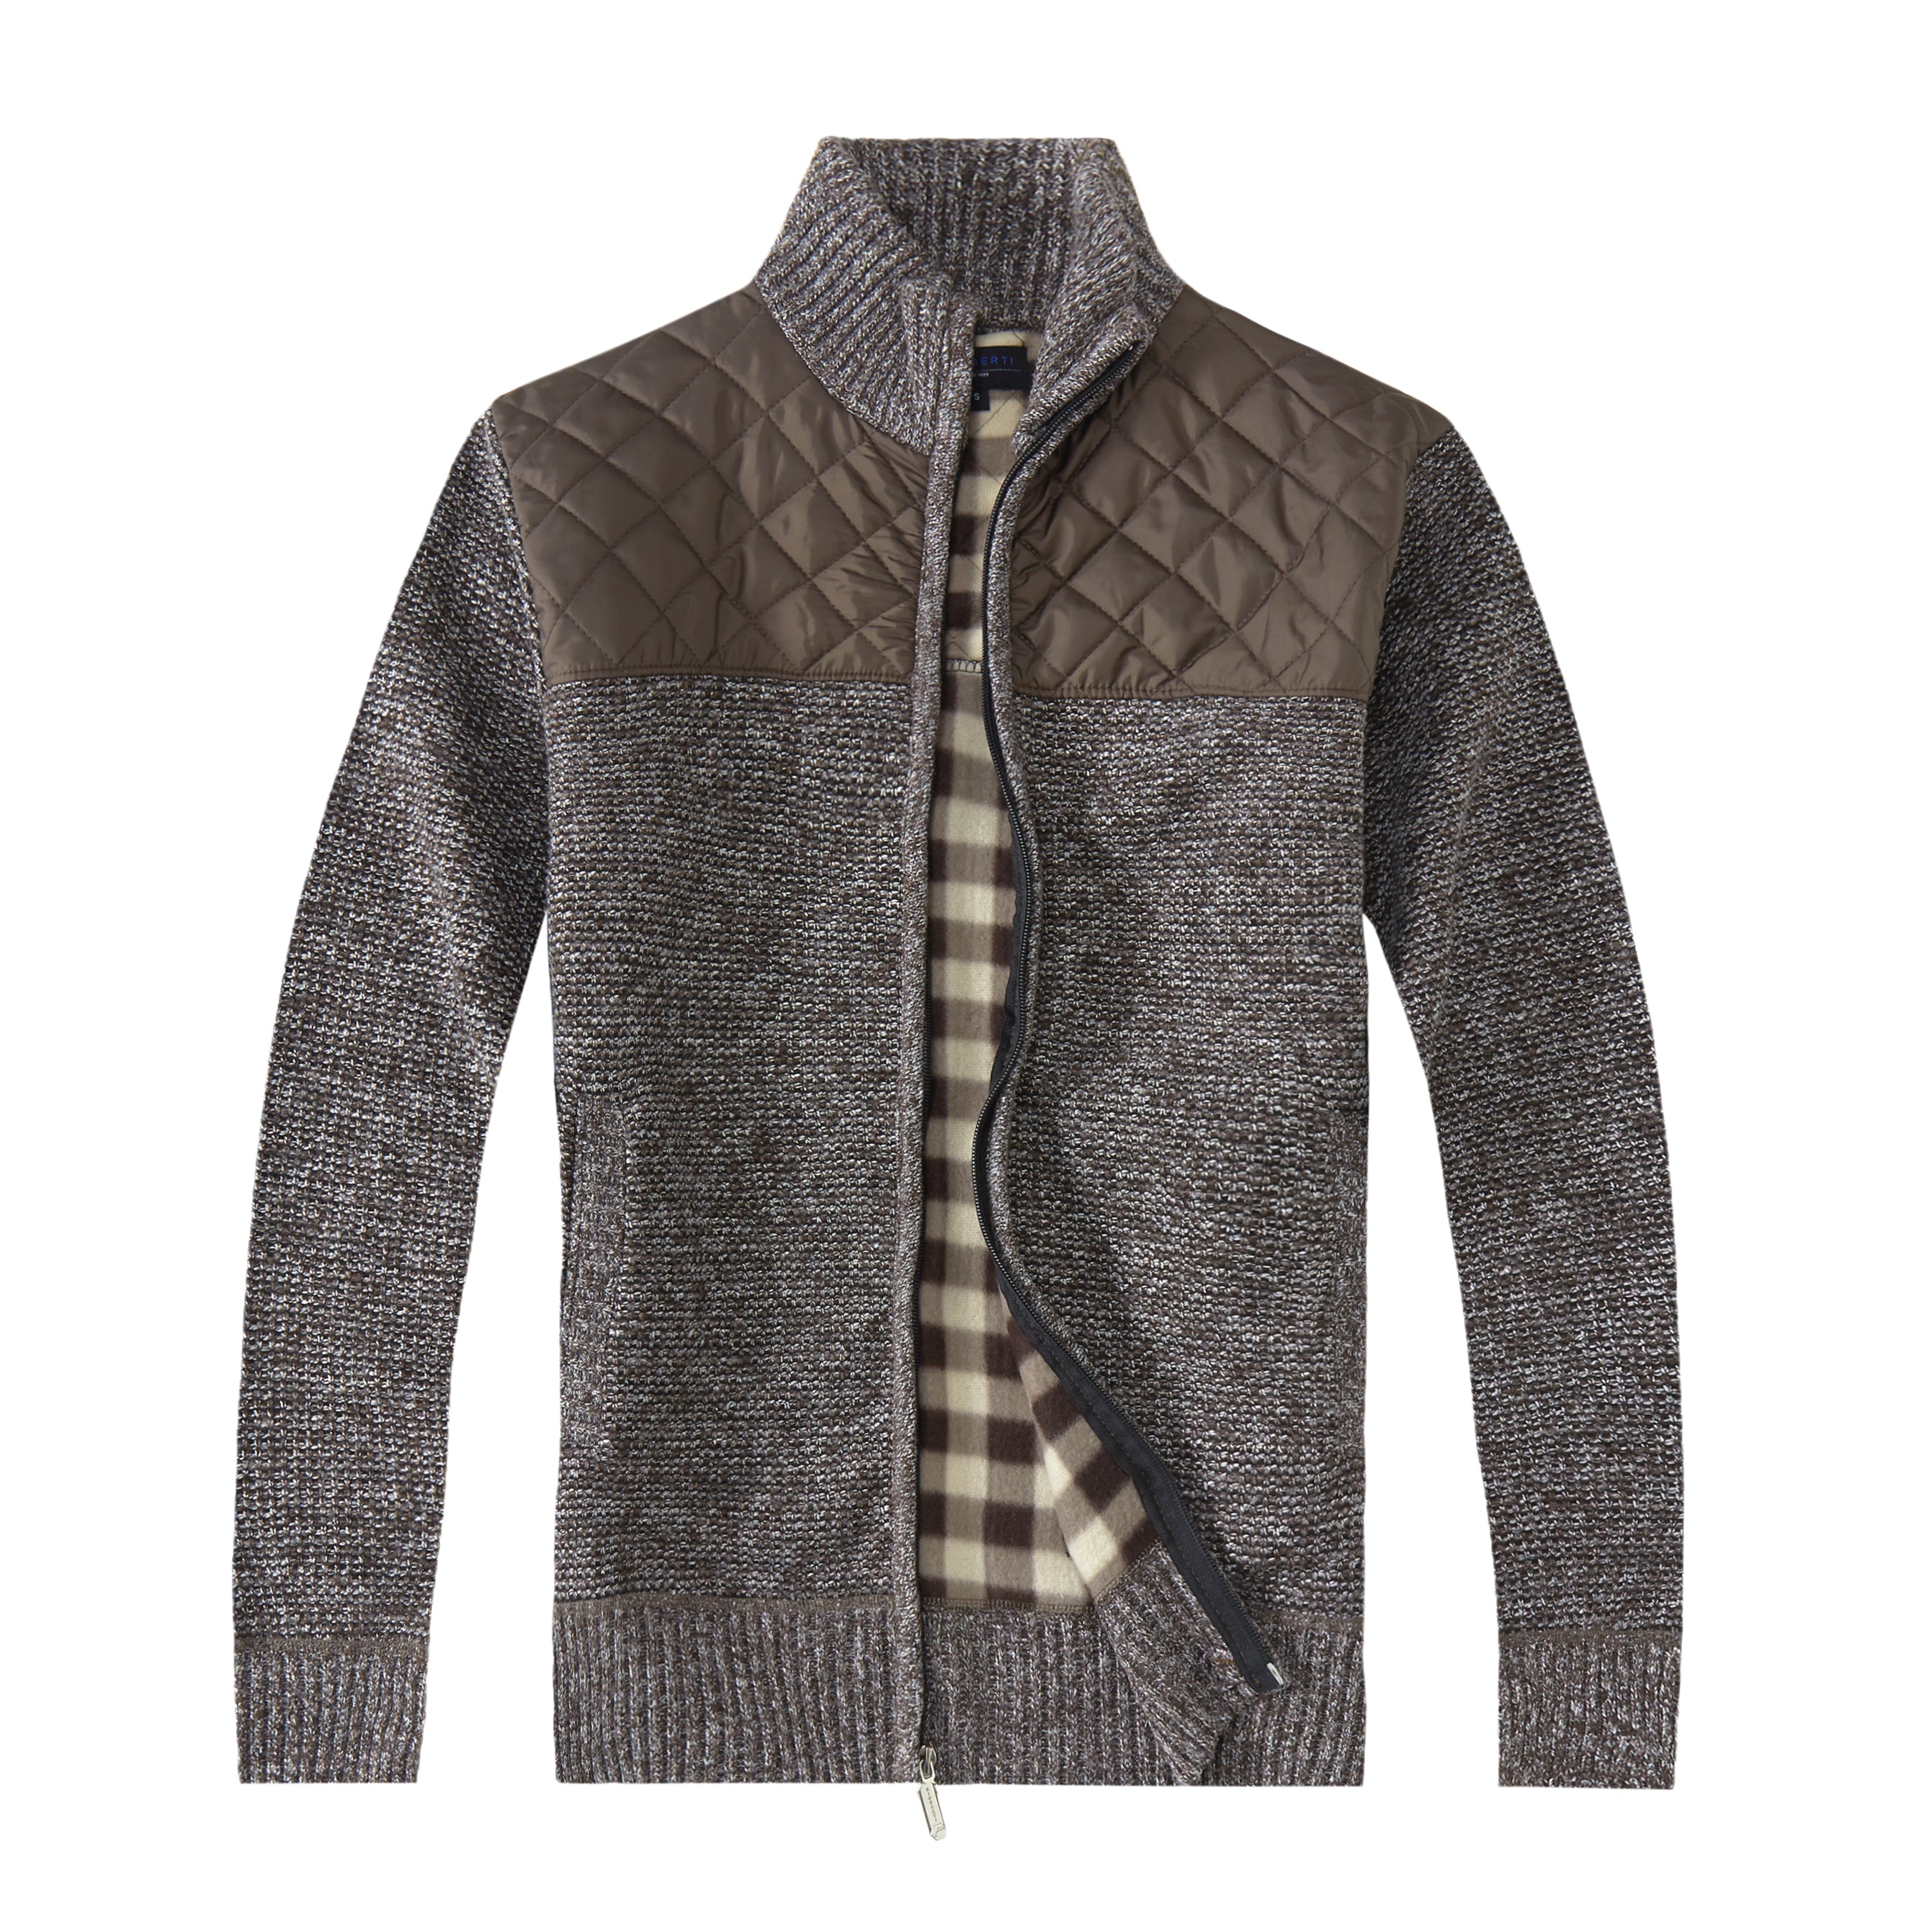 title:Gioberti Men's Marled Coffee Knitted Regular Fit Full Zip Cardigan Sweater with Soft Brushed Flannel Lining;color:Marled Coffee